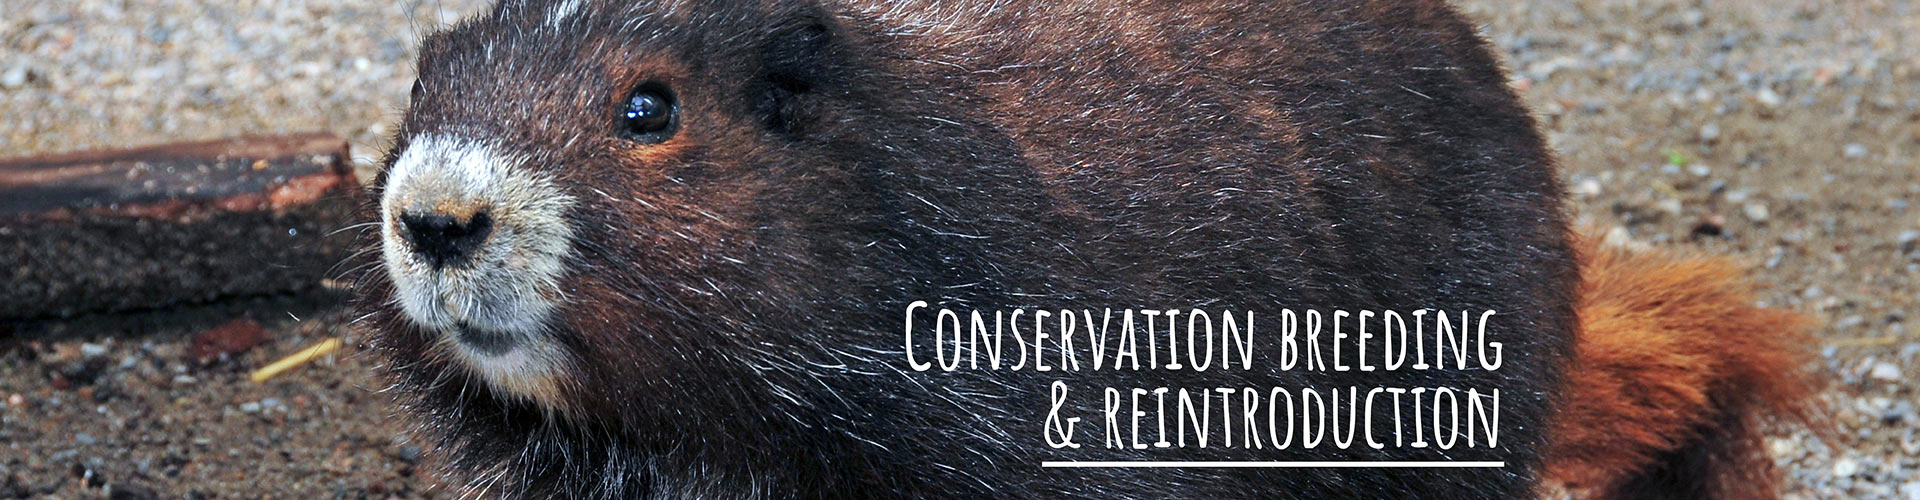 Conservation Breeding and Reintroduction - PCT